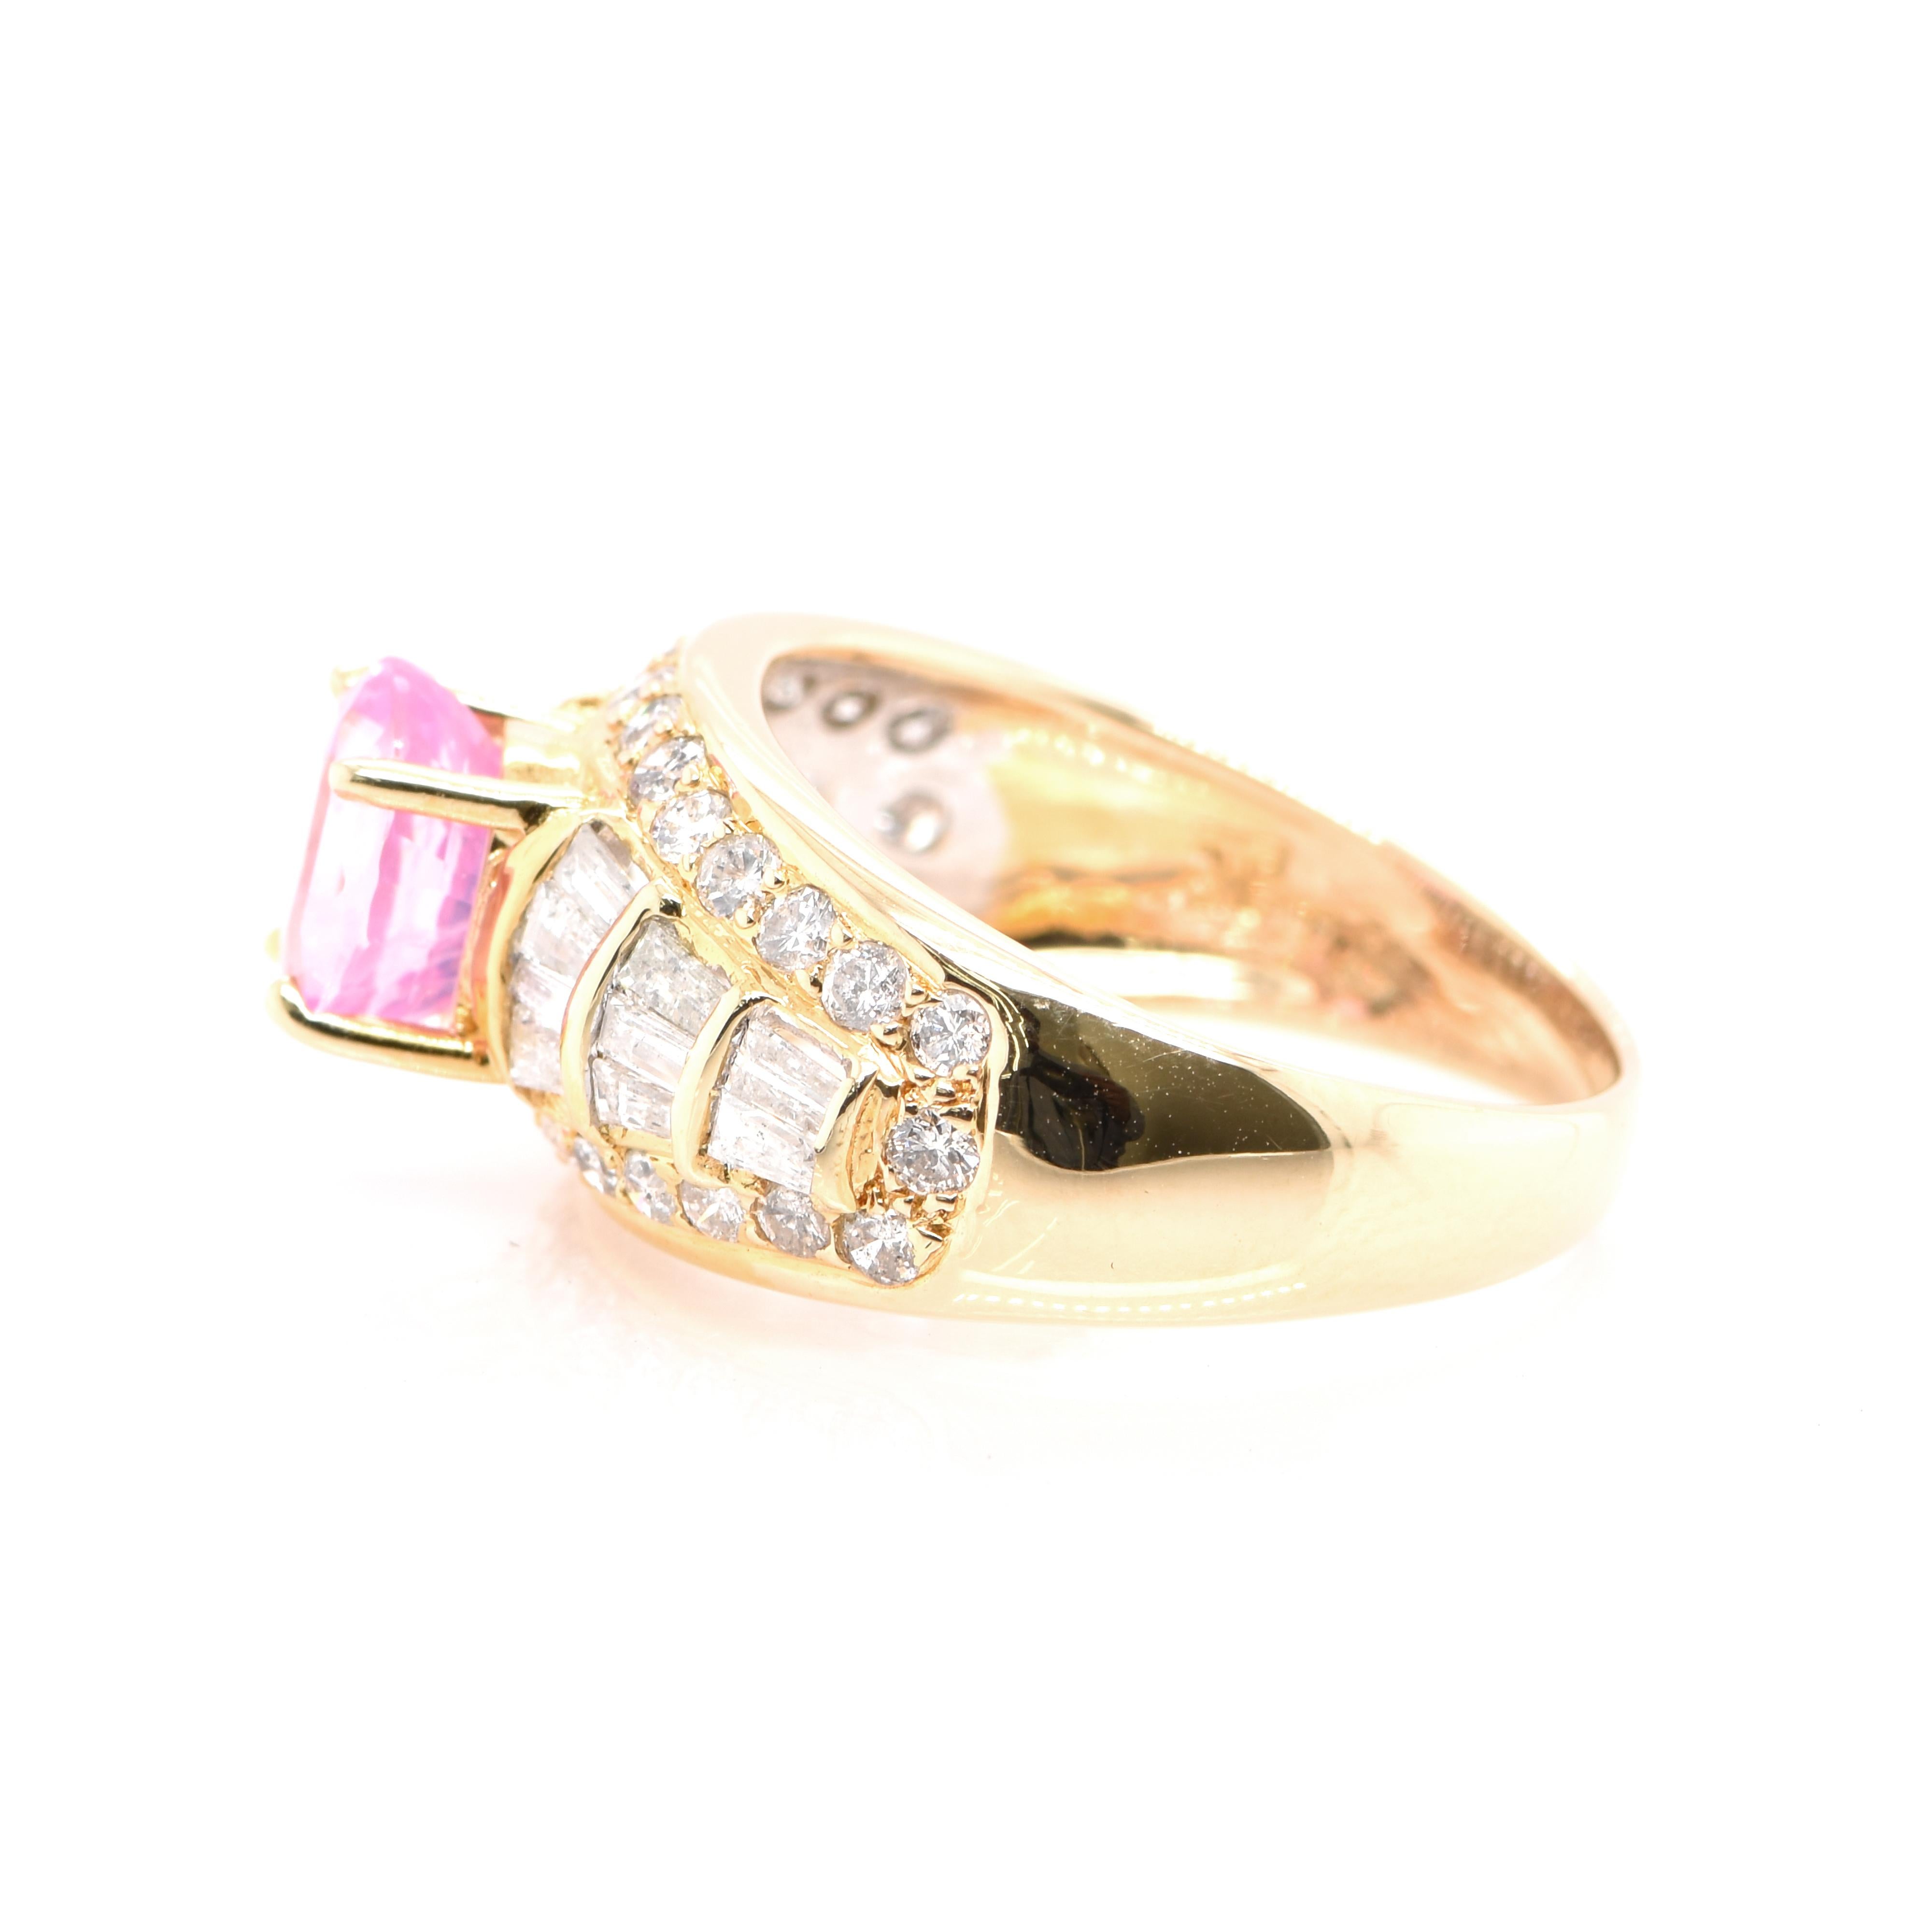 Oval Cut 1.72 Carat Natural Pink Sapphire and Diamond Cocktail Ring Set in 18 Karat Gold